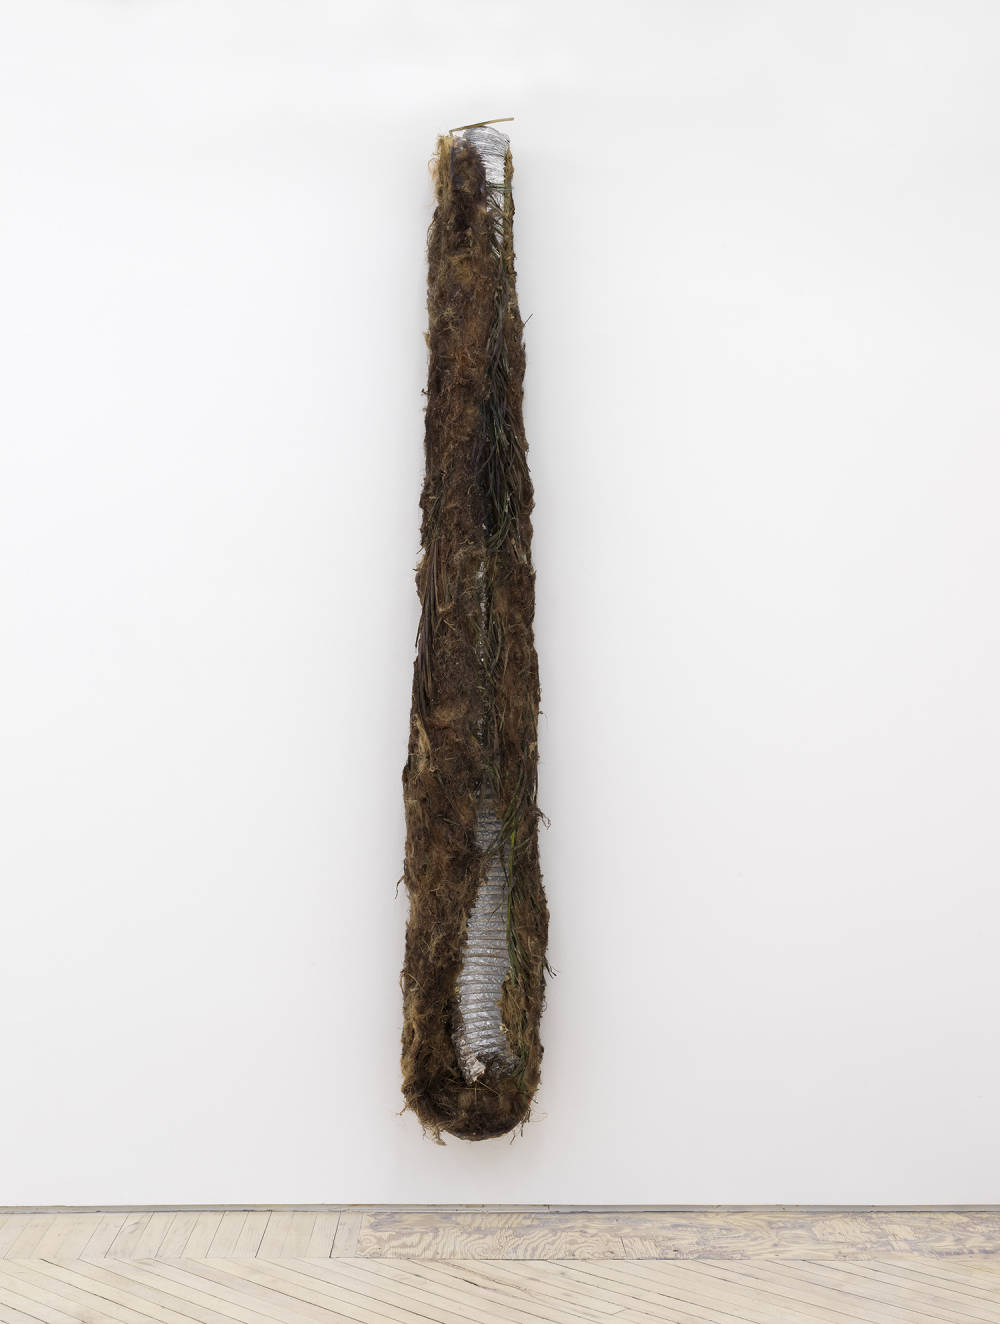 Image of a sculpture by Brandon Ndife showing a silvery tube of HVAC duct hung vertically on the wall. The ductwork is covered with a brown furry vegetal substance similar to a Ghillie Suit.